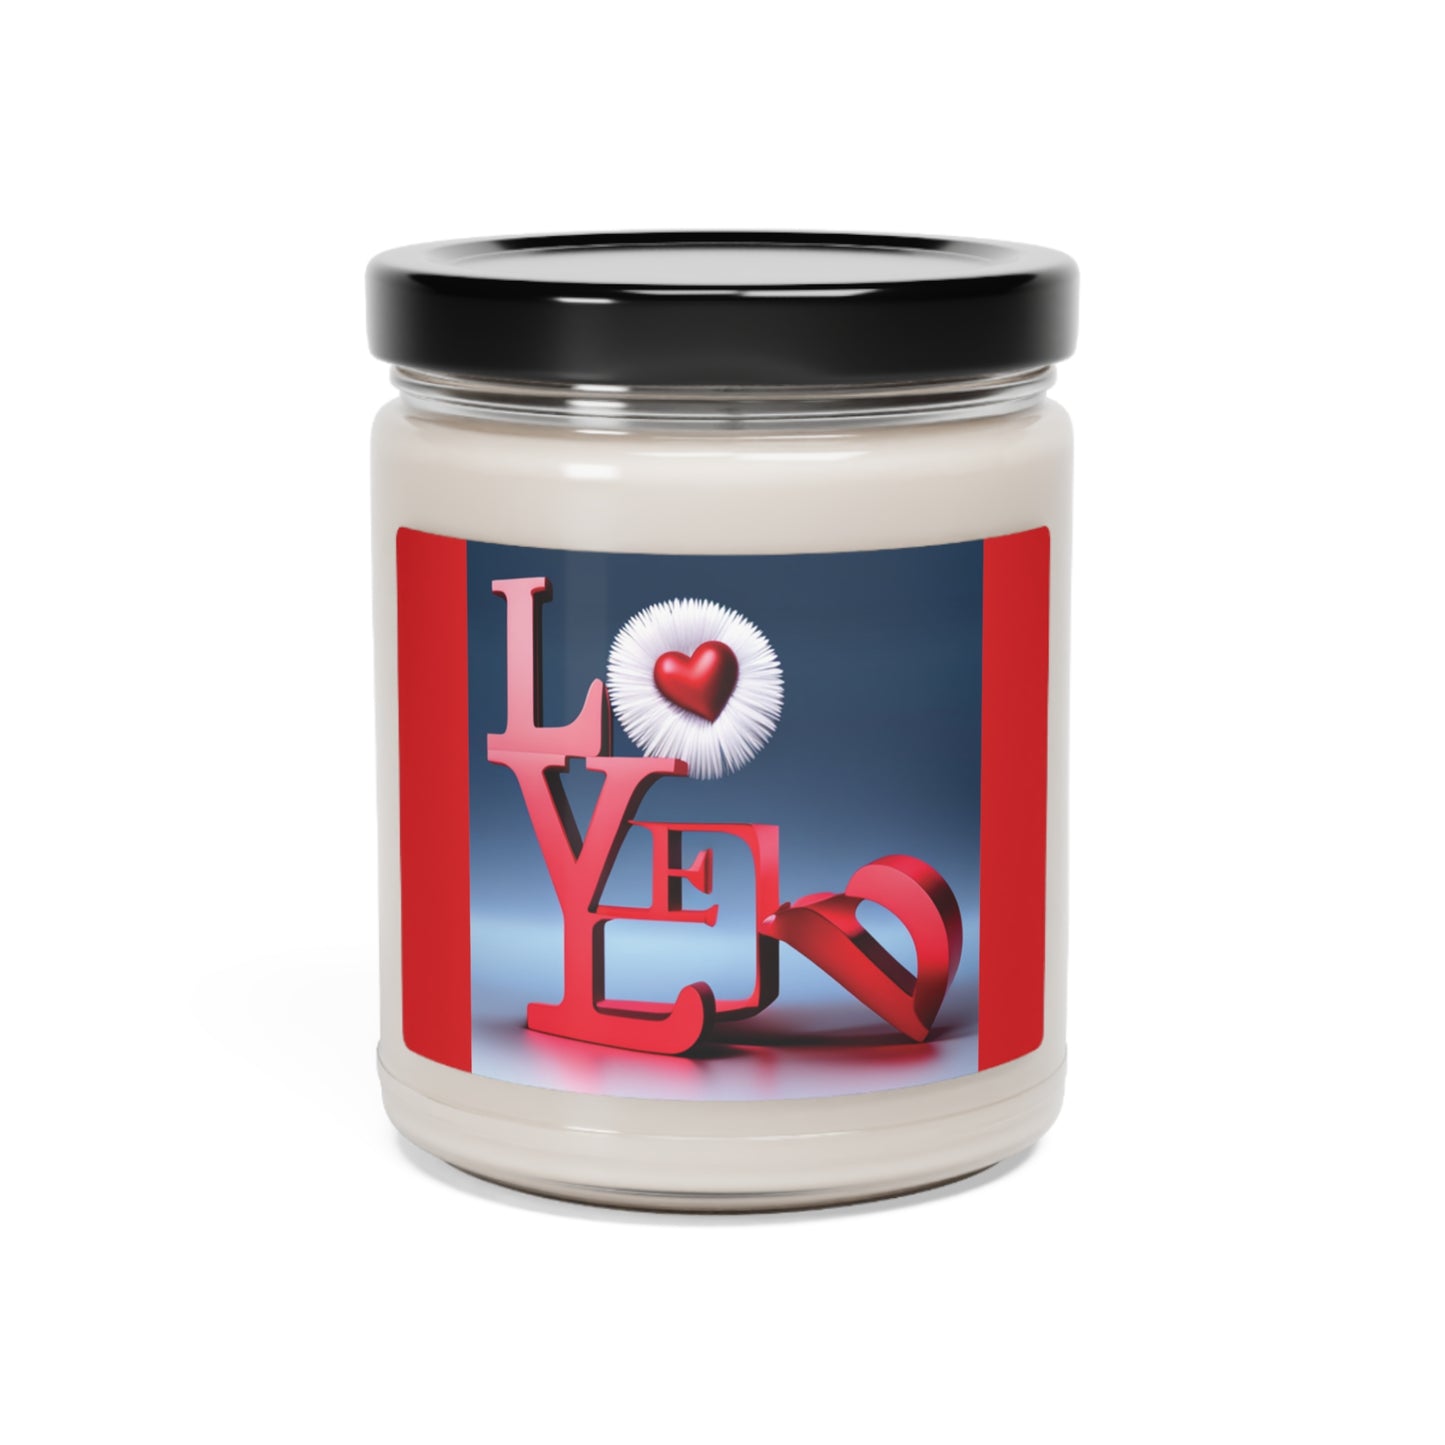 The Love Scented Soy Candle, 9oz